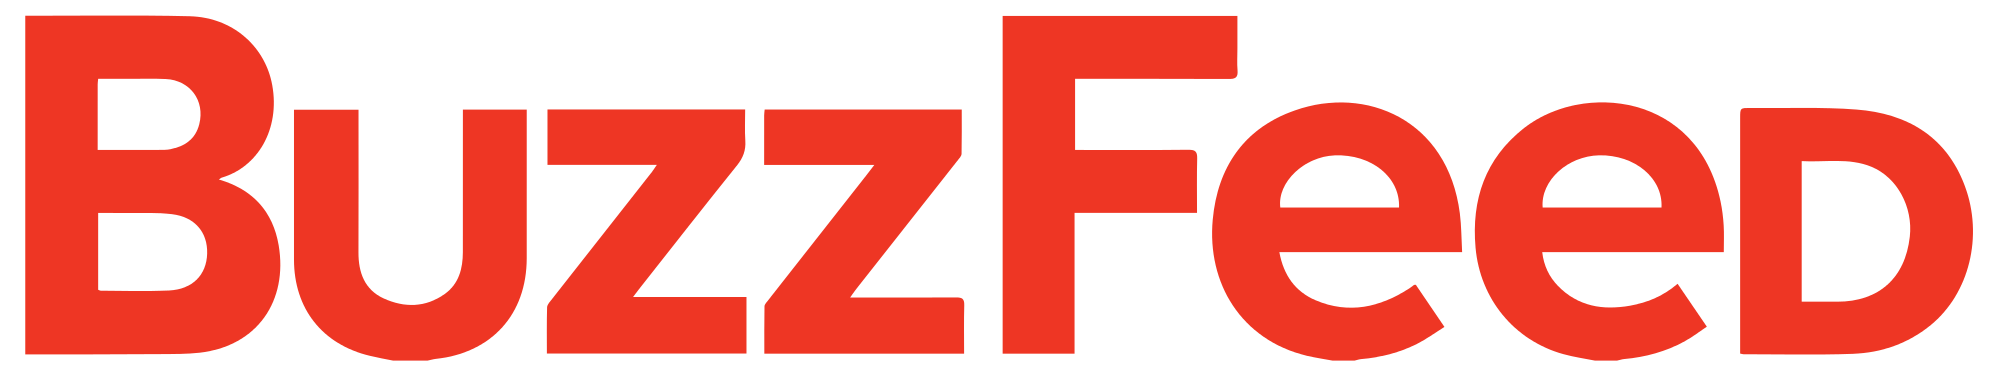 2000px-BuzzFeed.svg.png